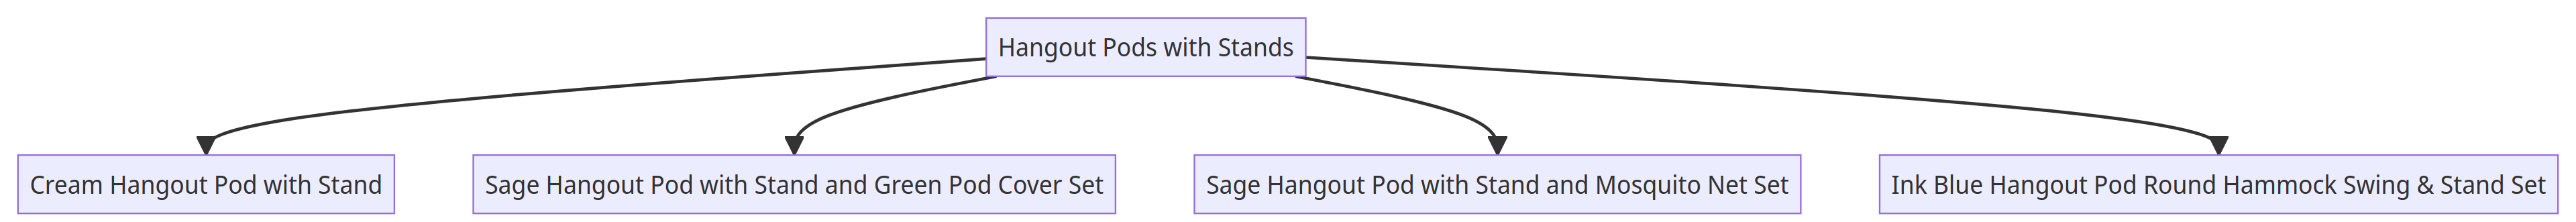 Flow Chart of Hangout Pods with Stands